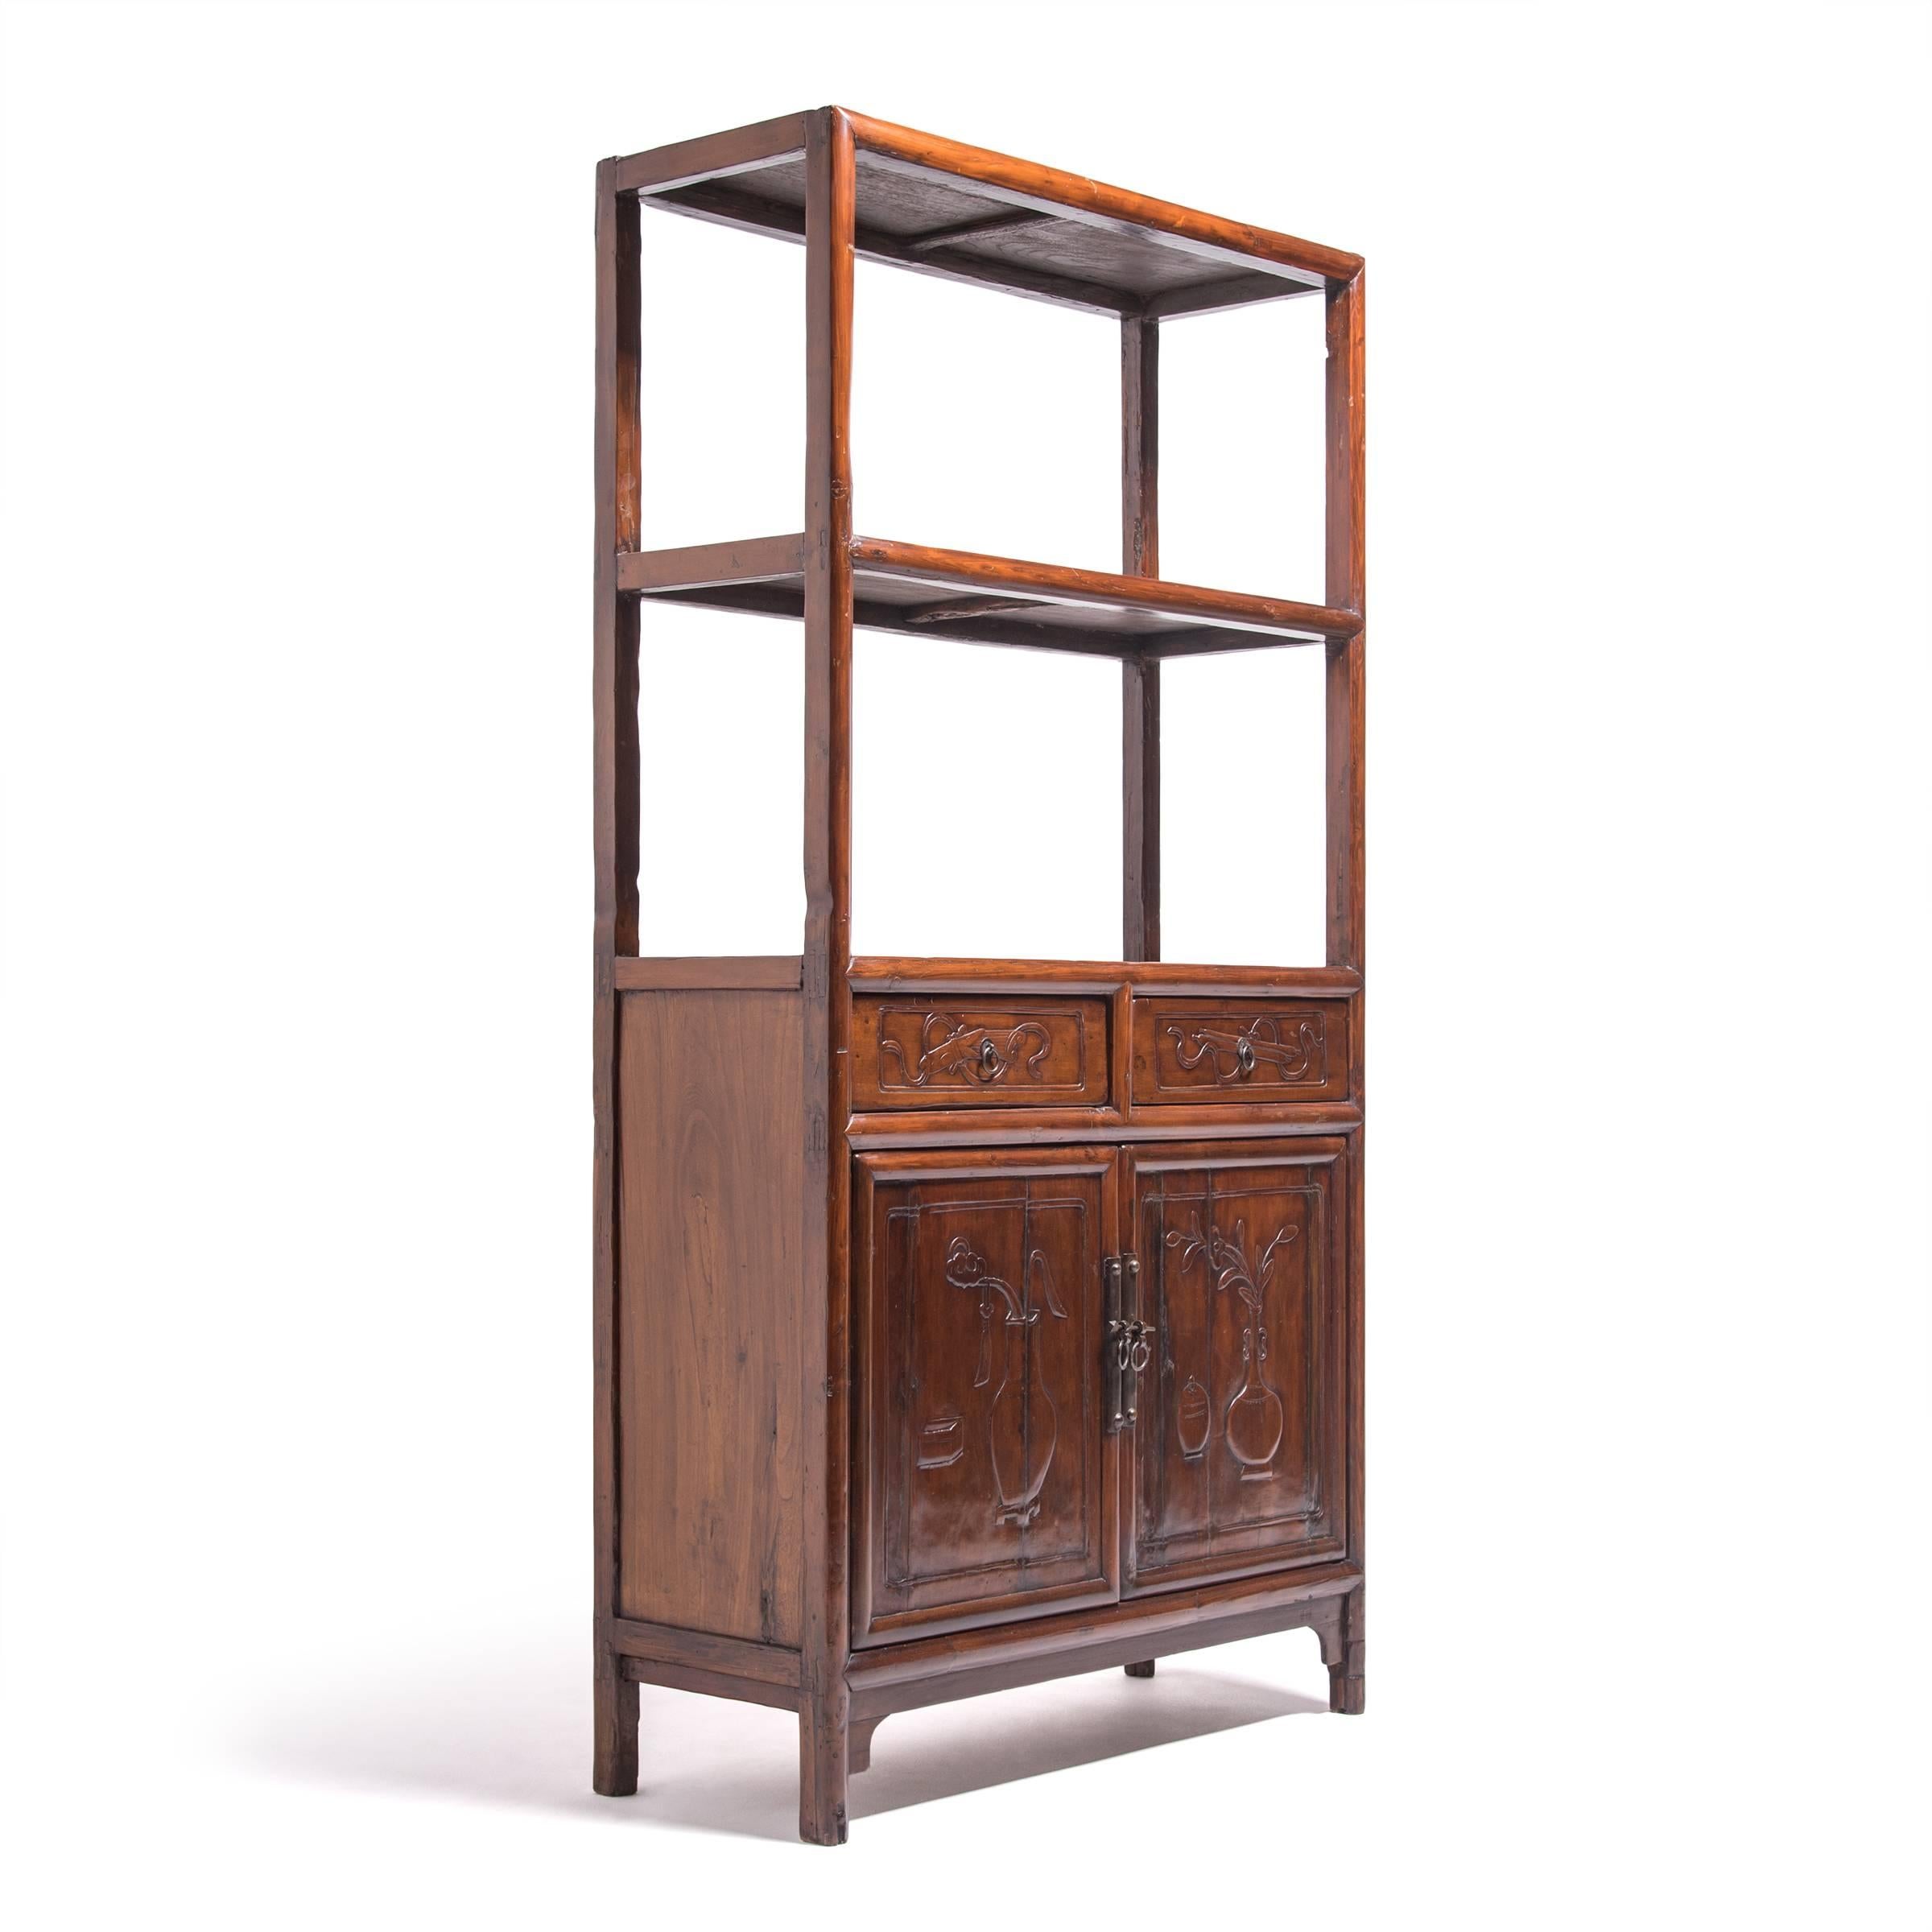 Chinese Scholars' Display Shelf, c. 1850 In Good Condition For Sale In Chicago, IL